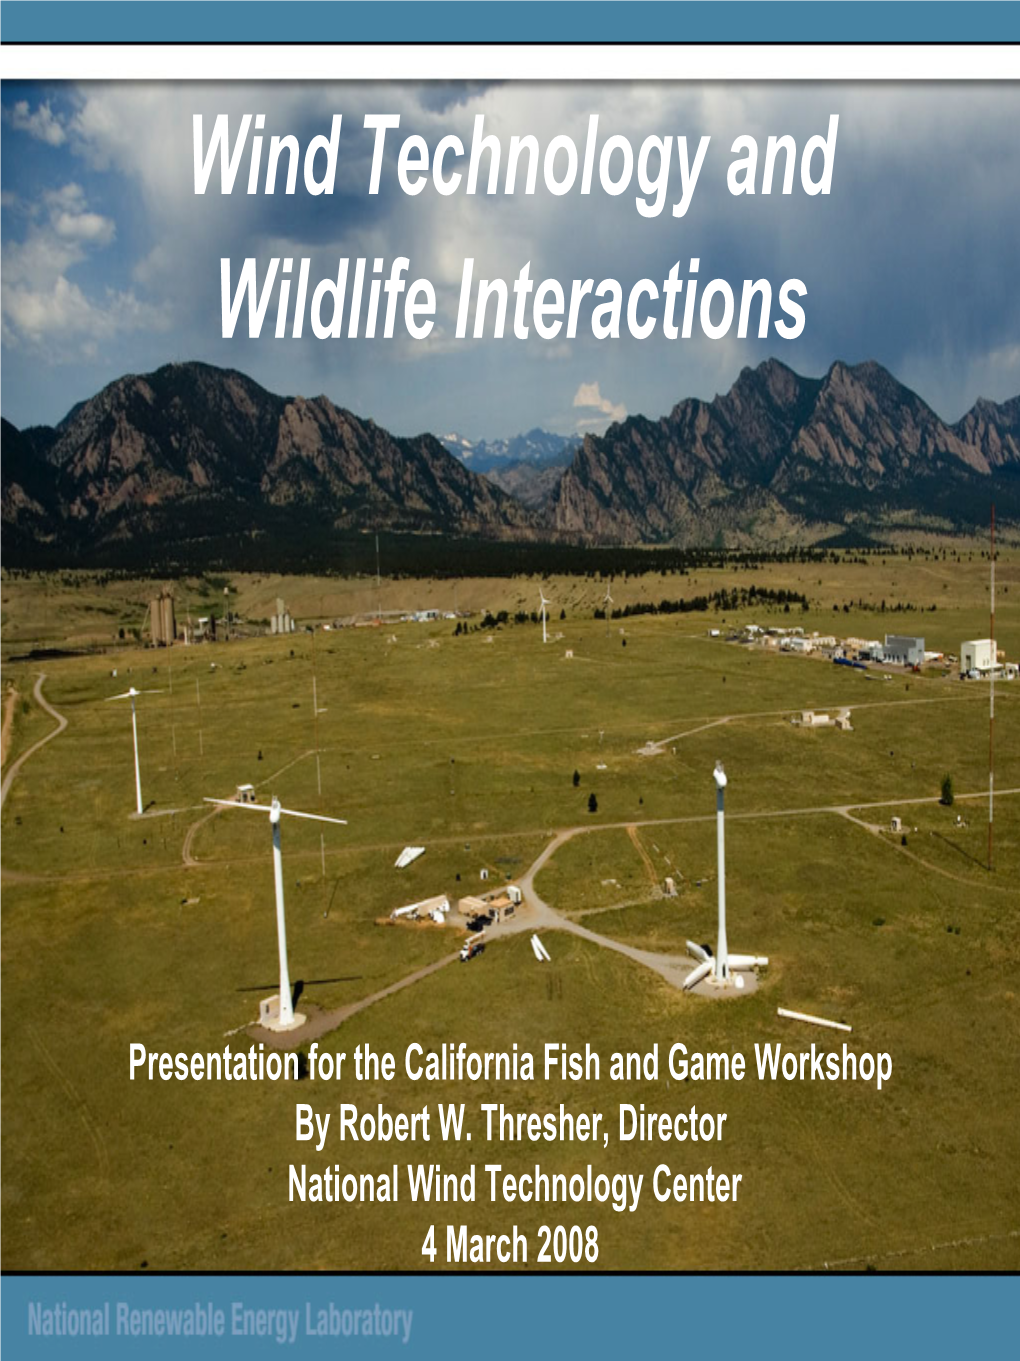 Wind Technology and Wildlife Interactions